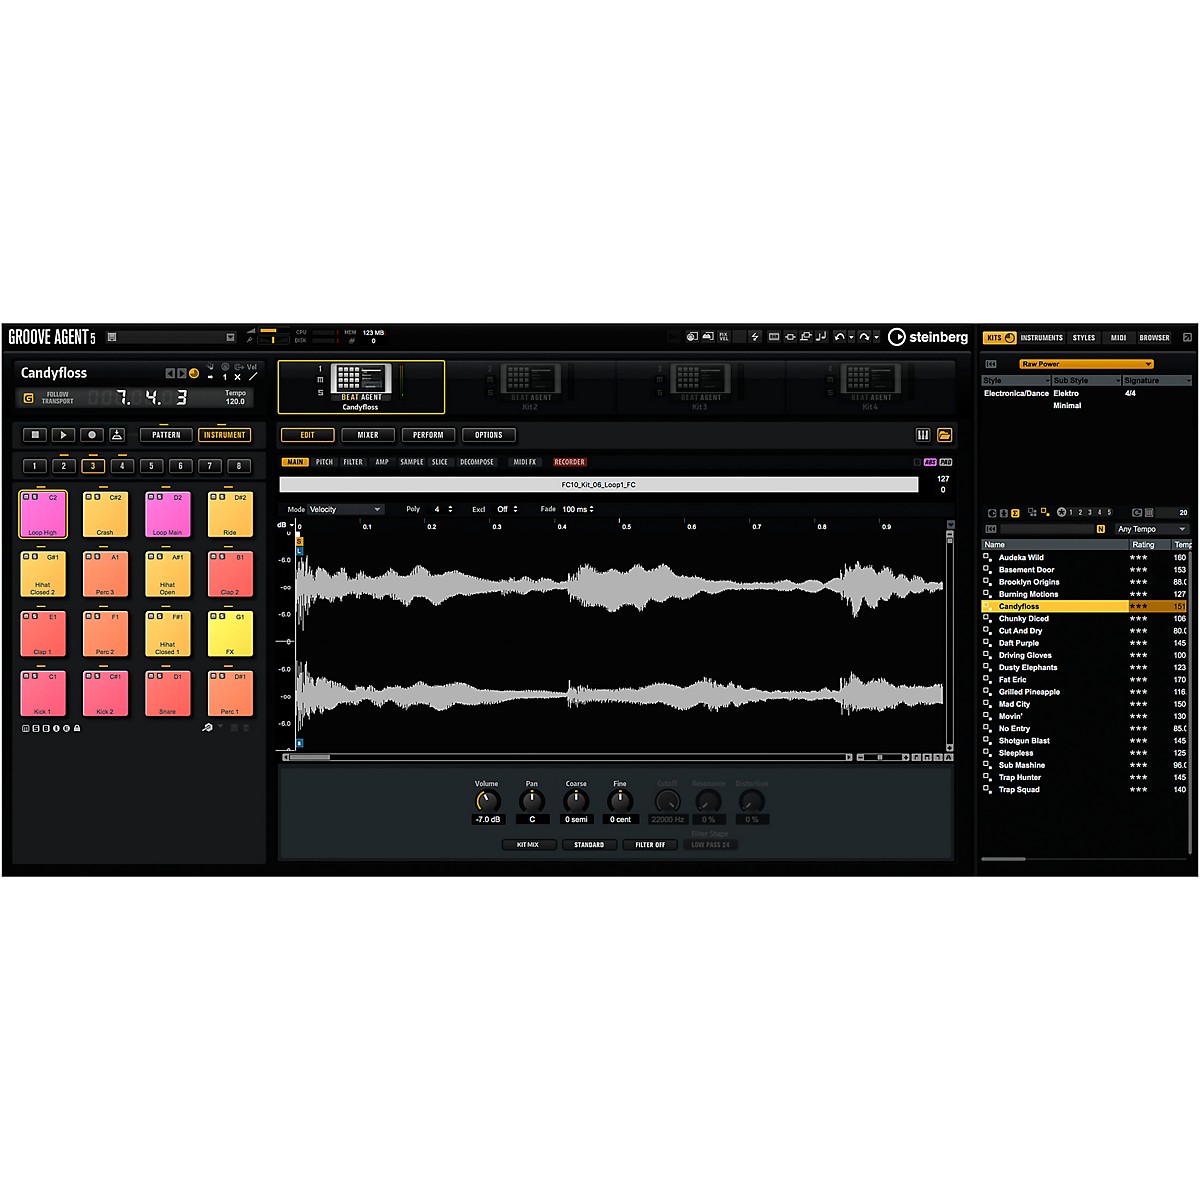 groove agent 5 free download